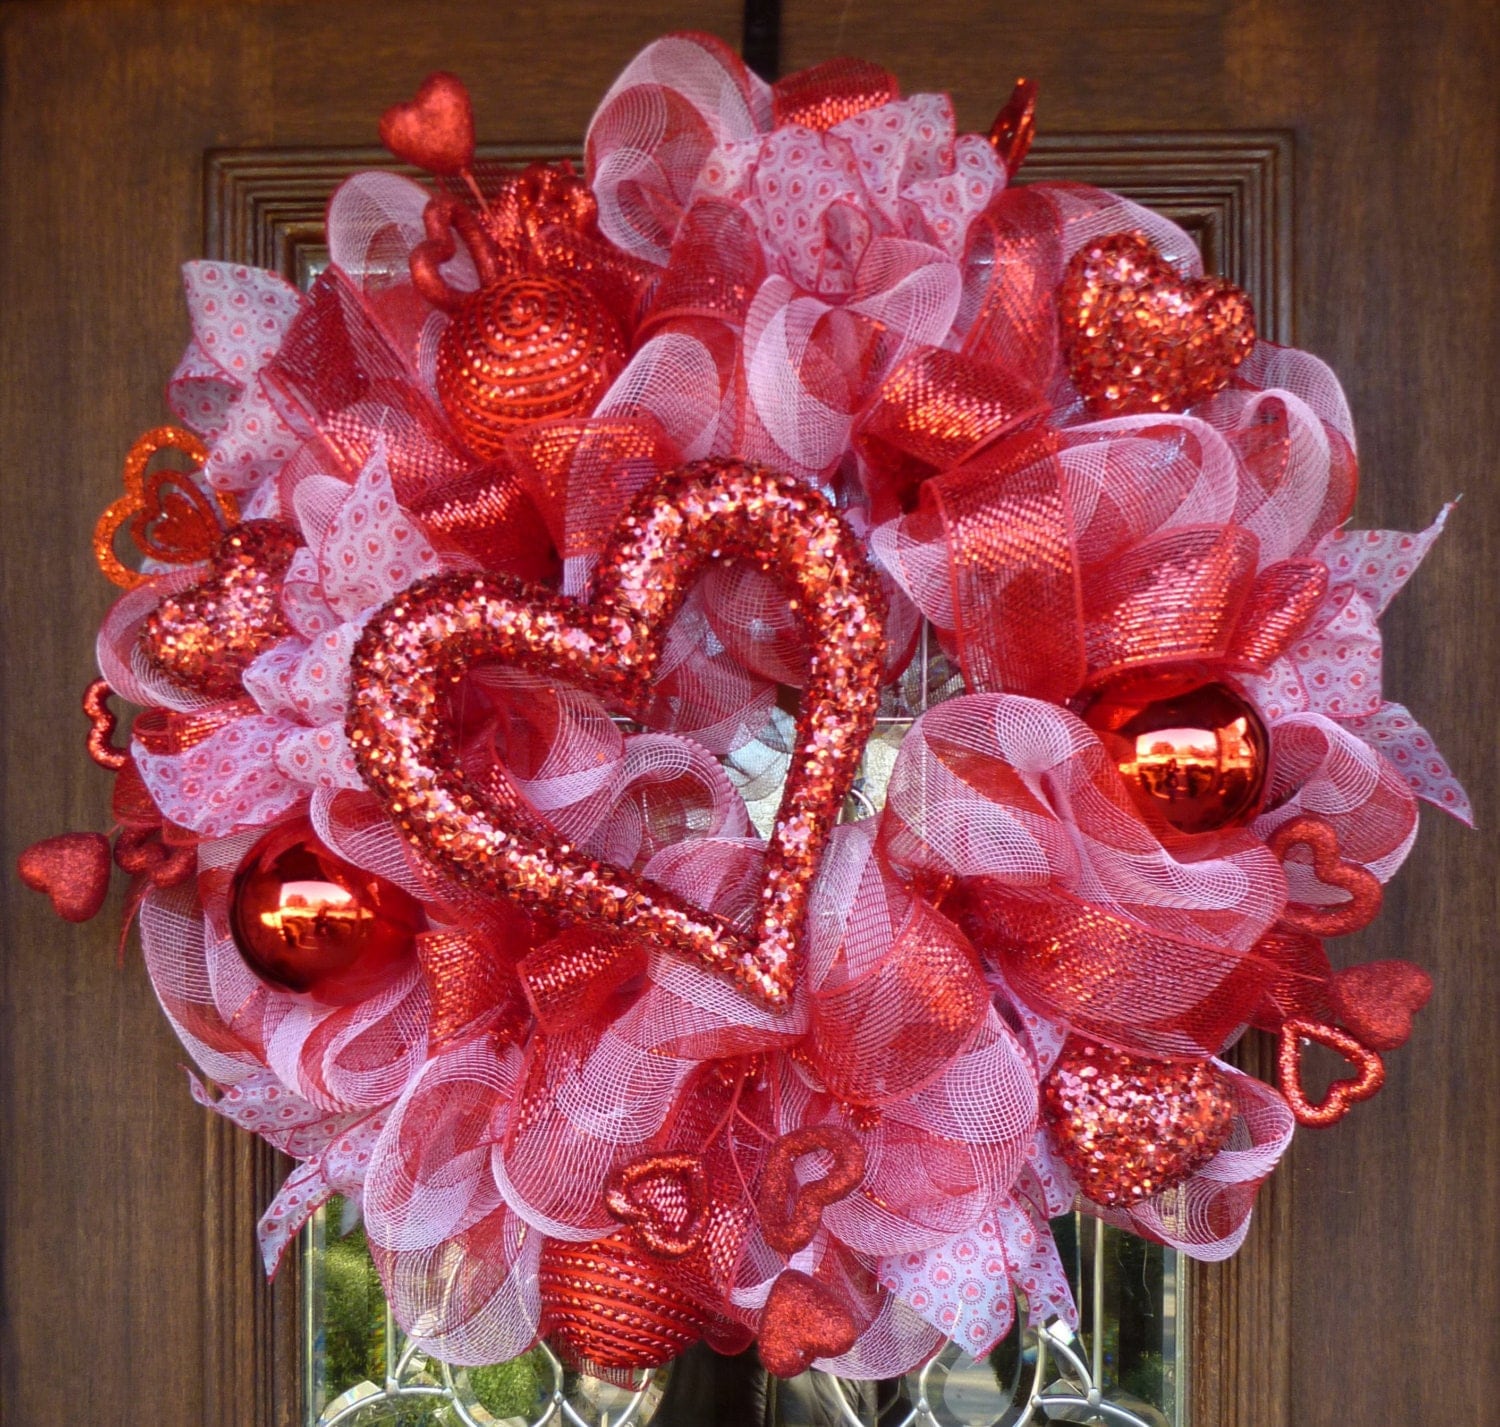 Deco Mesh VALENTINE'S DAY Wreath with HEARTS